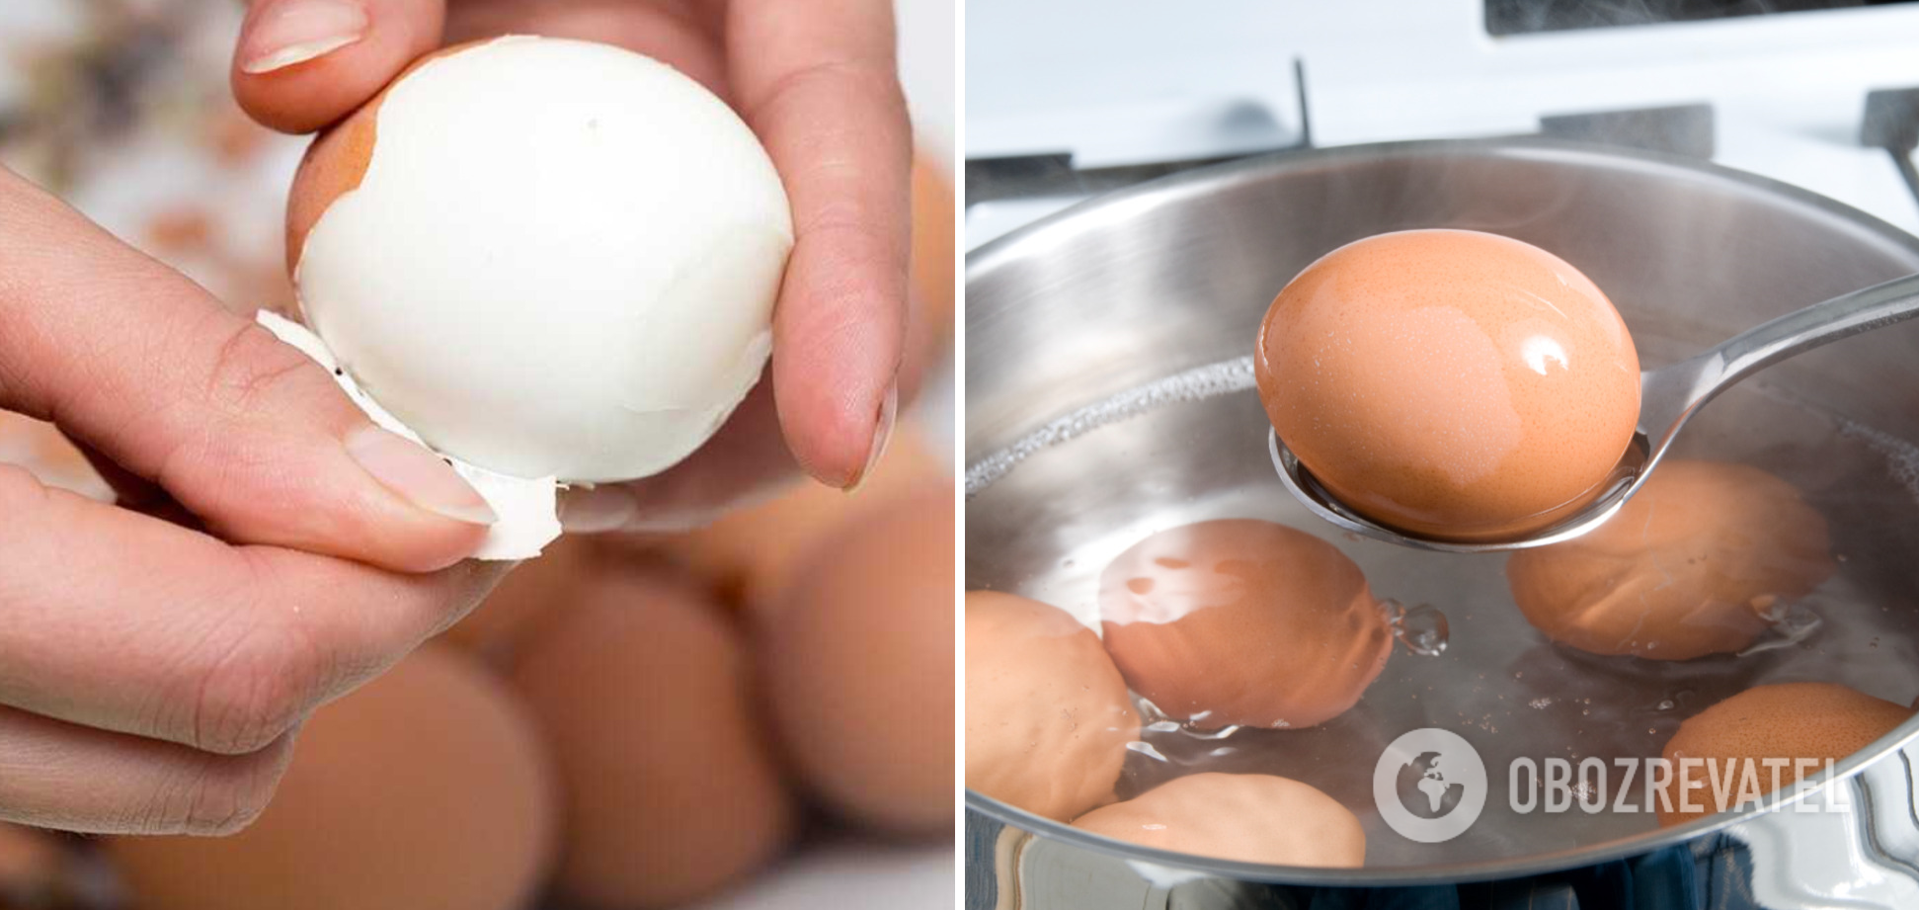 How to boil eggs so that they are easy to peel